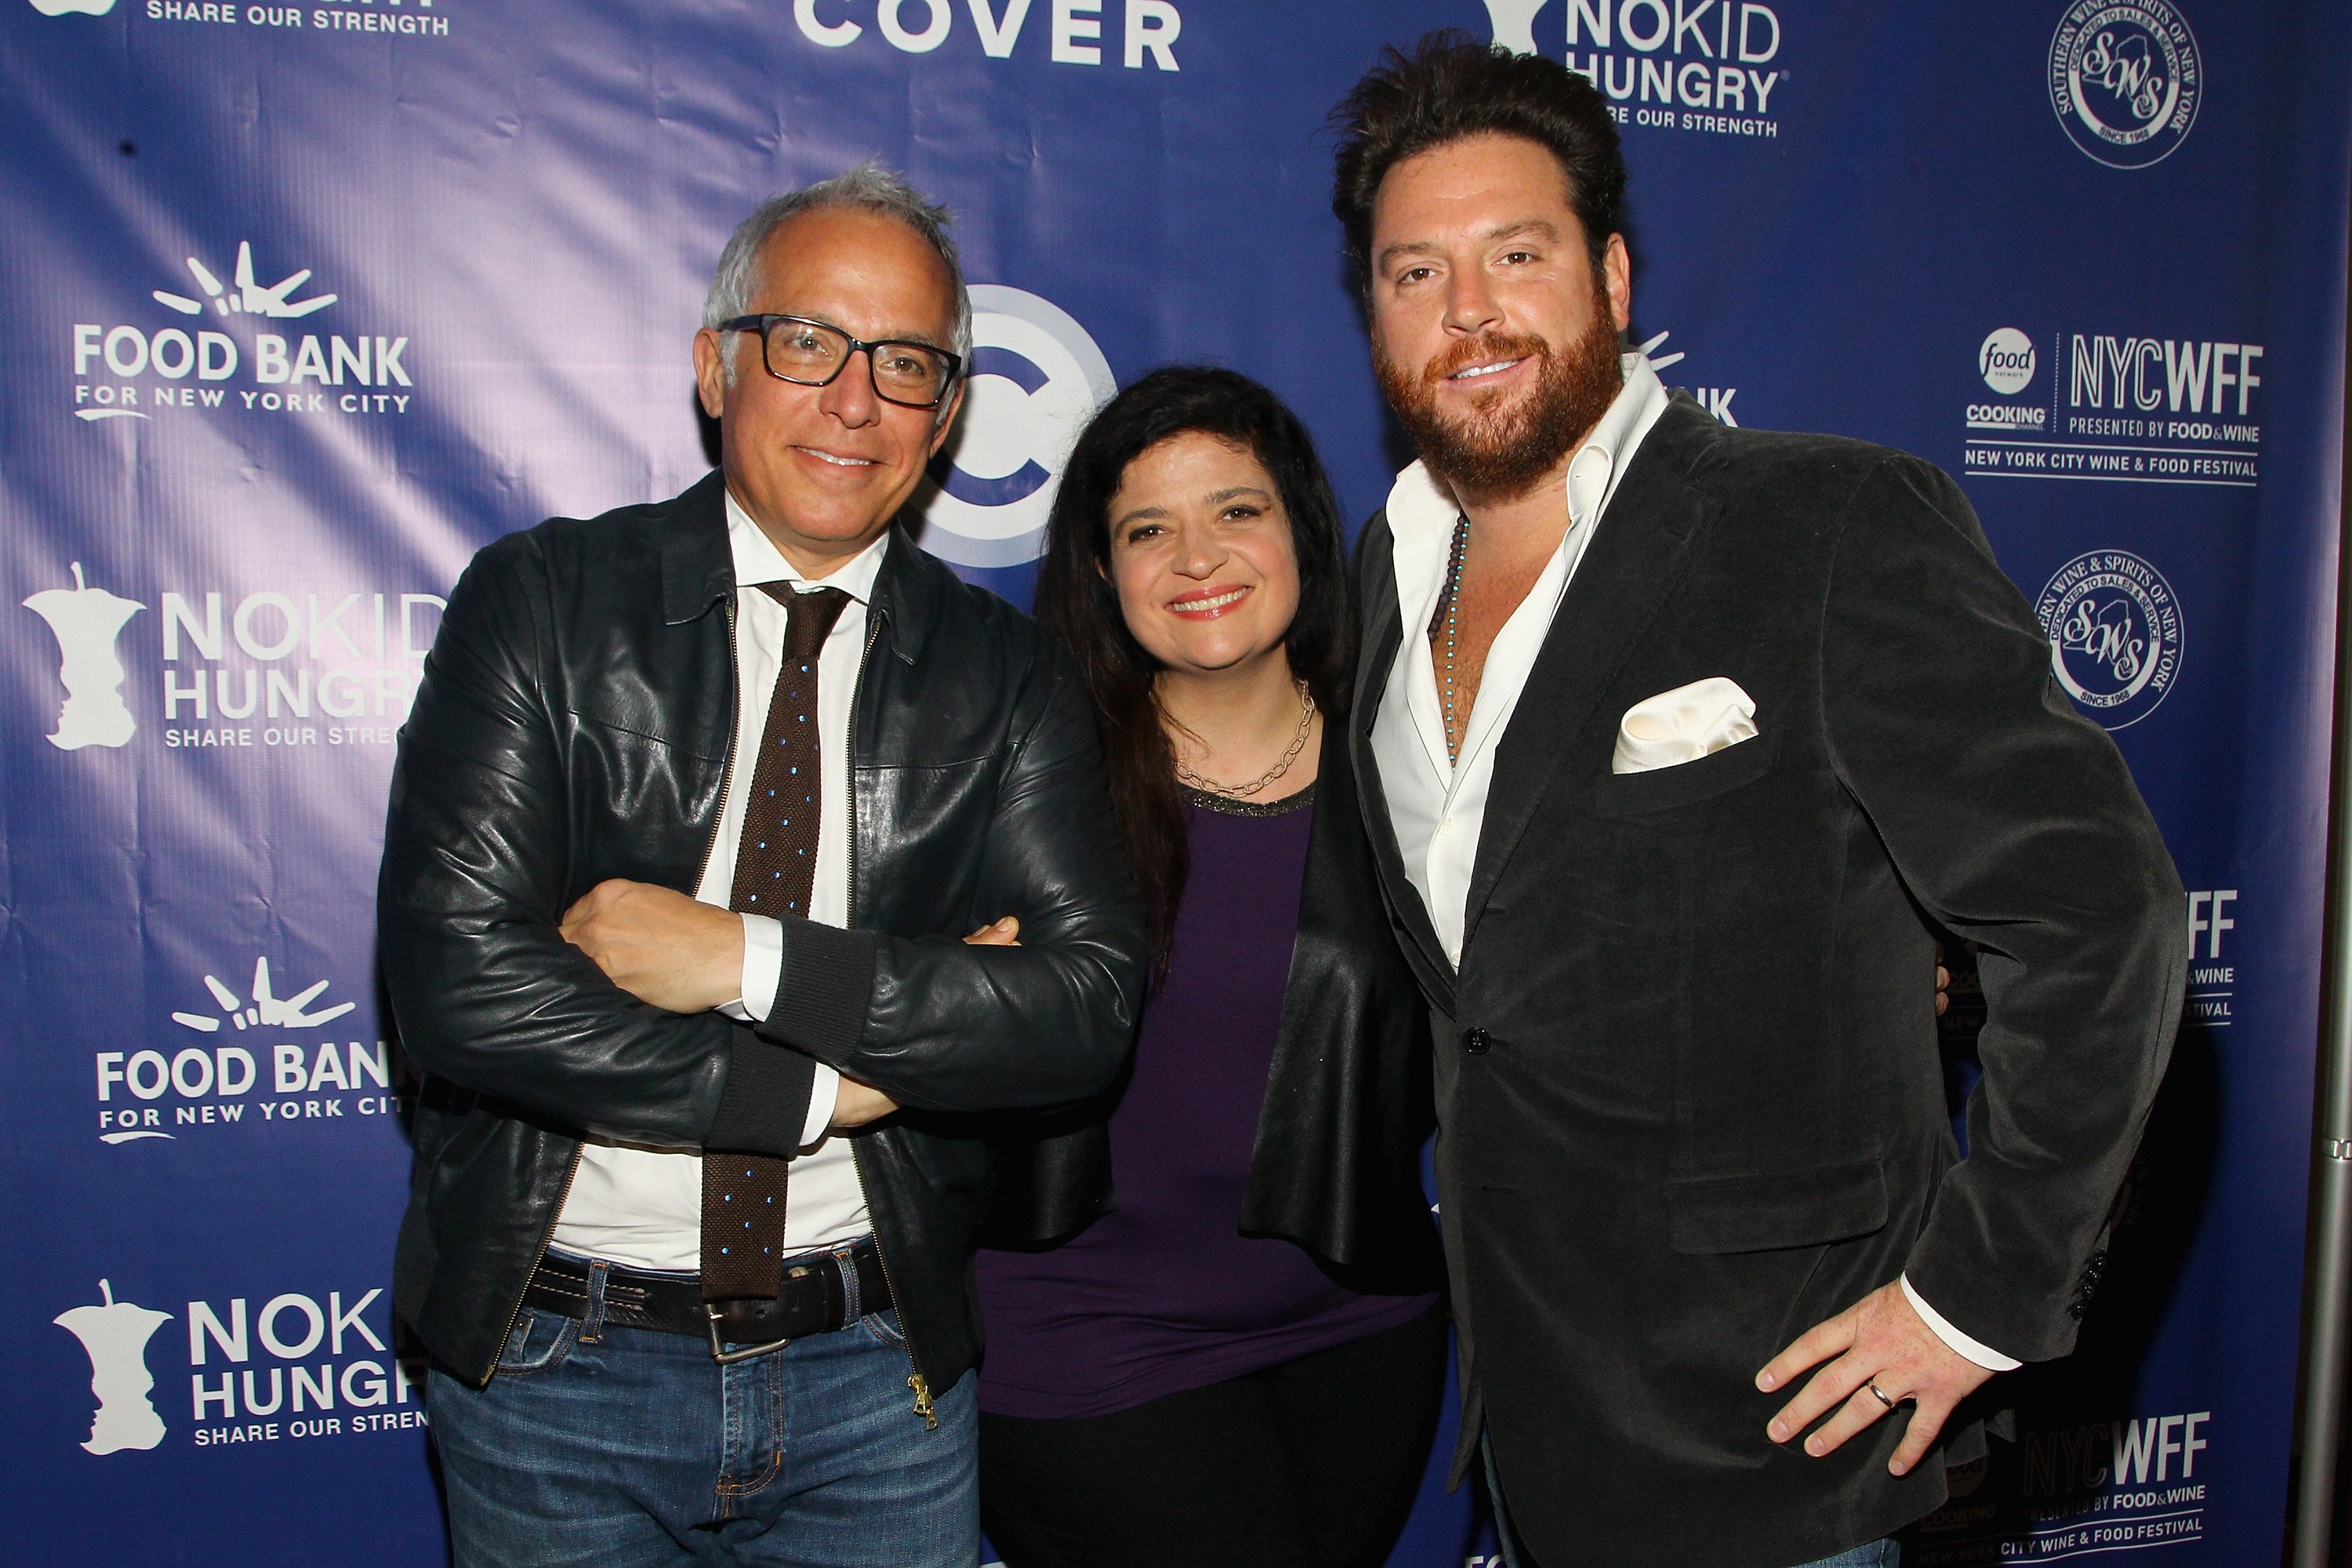 Geofrey Zakarian, Alex Guarnaschelli and Scott Conant attend at event for the Food Network